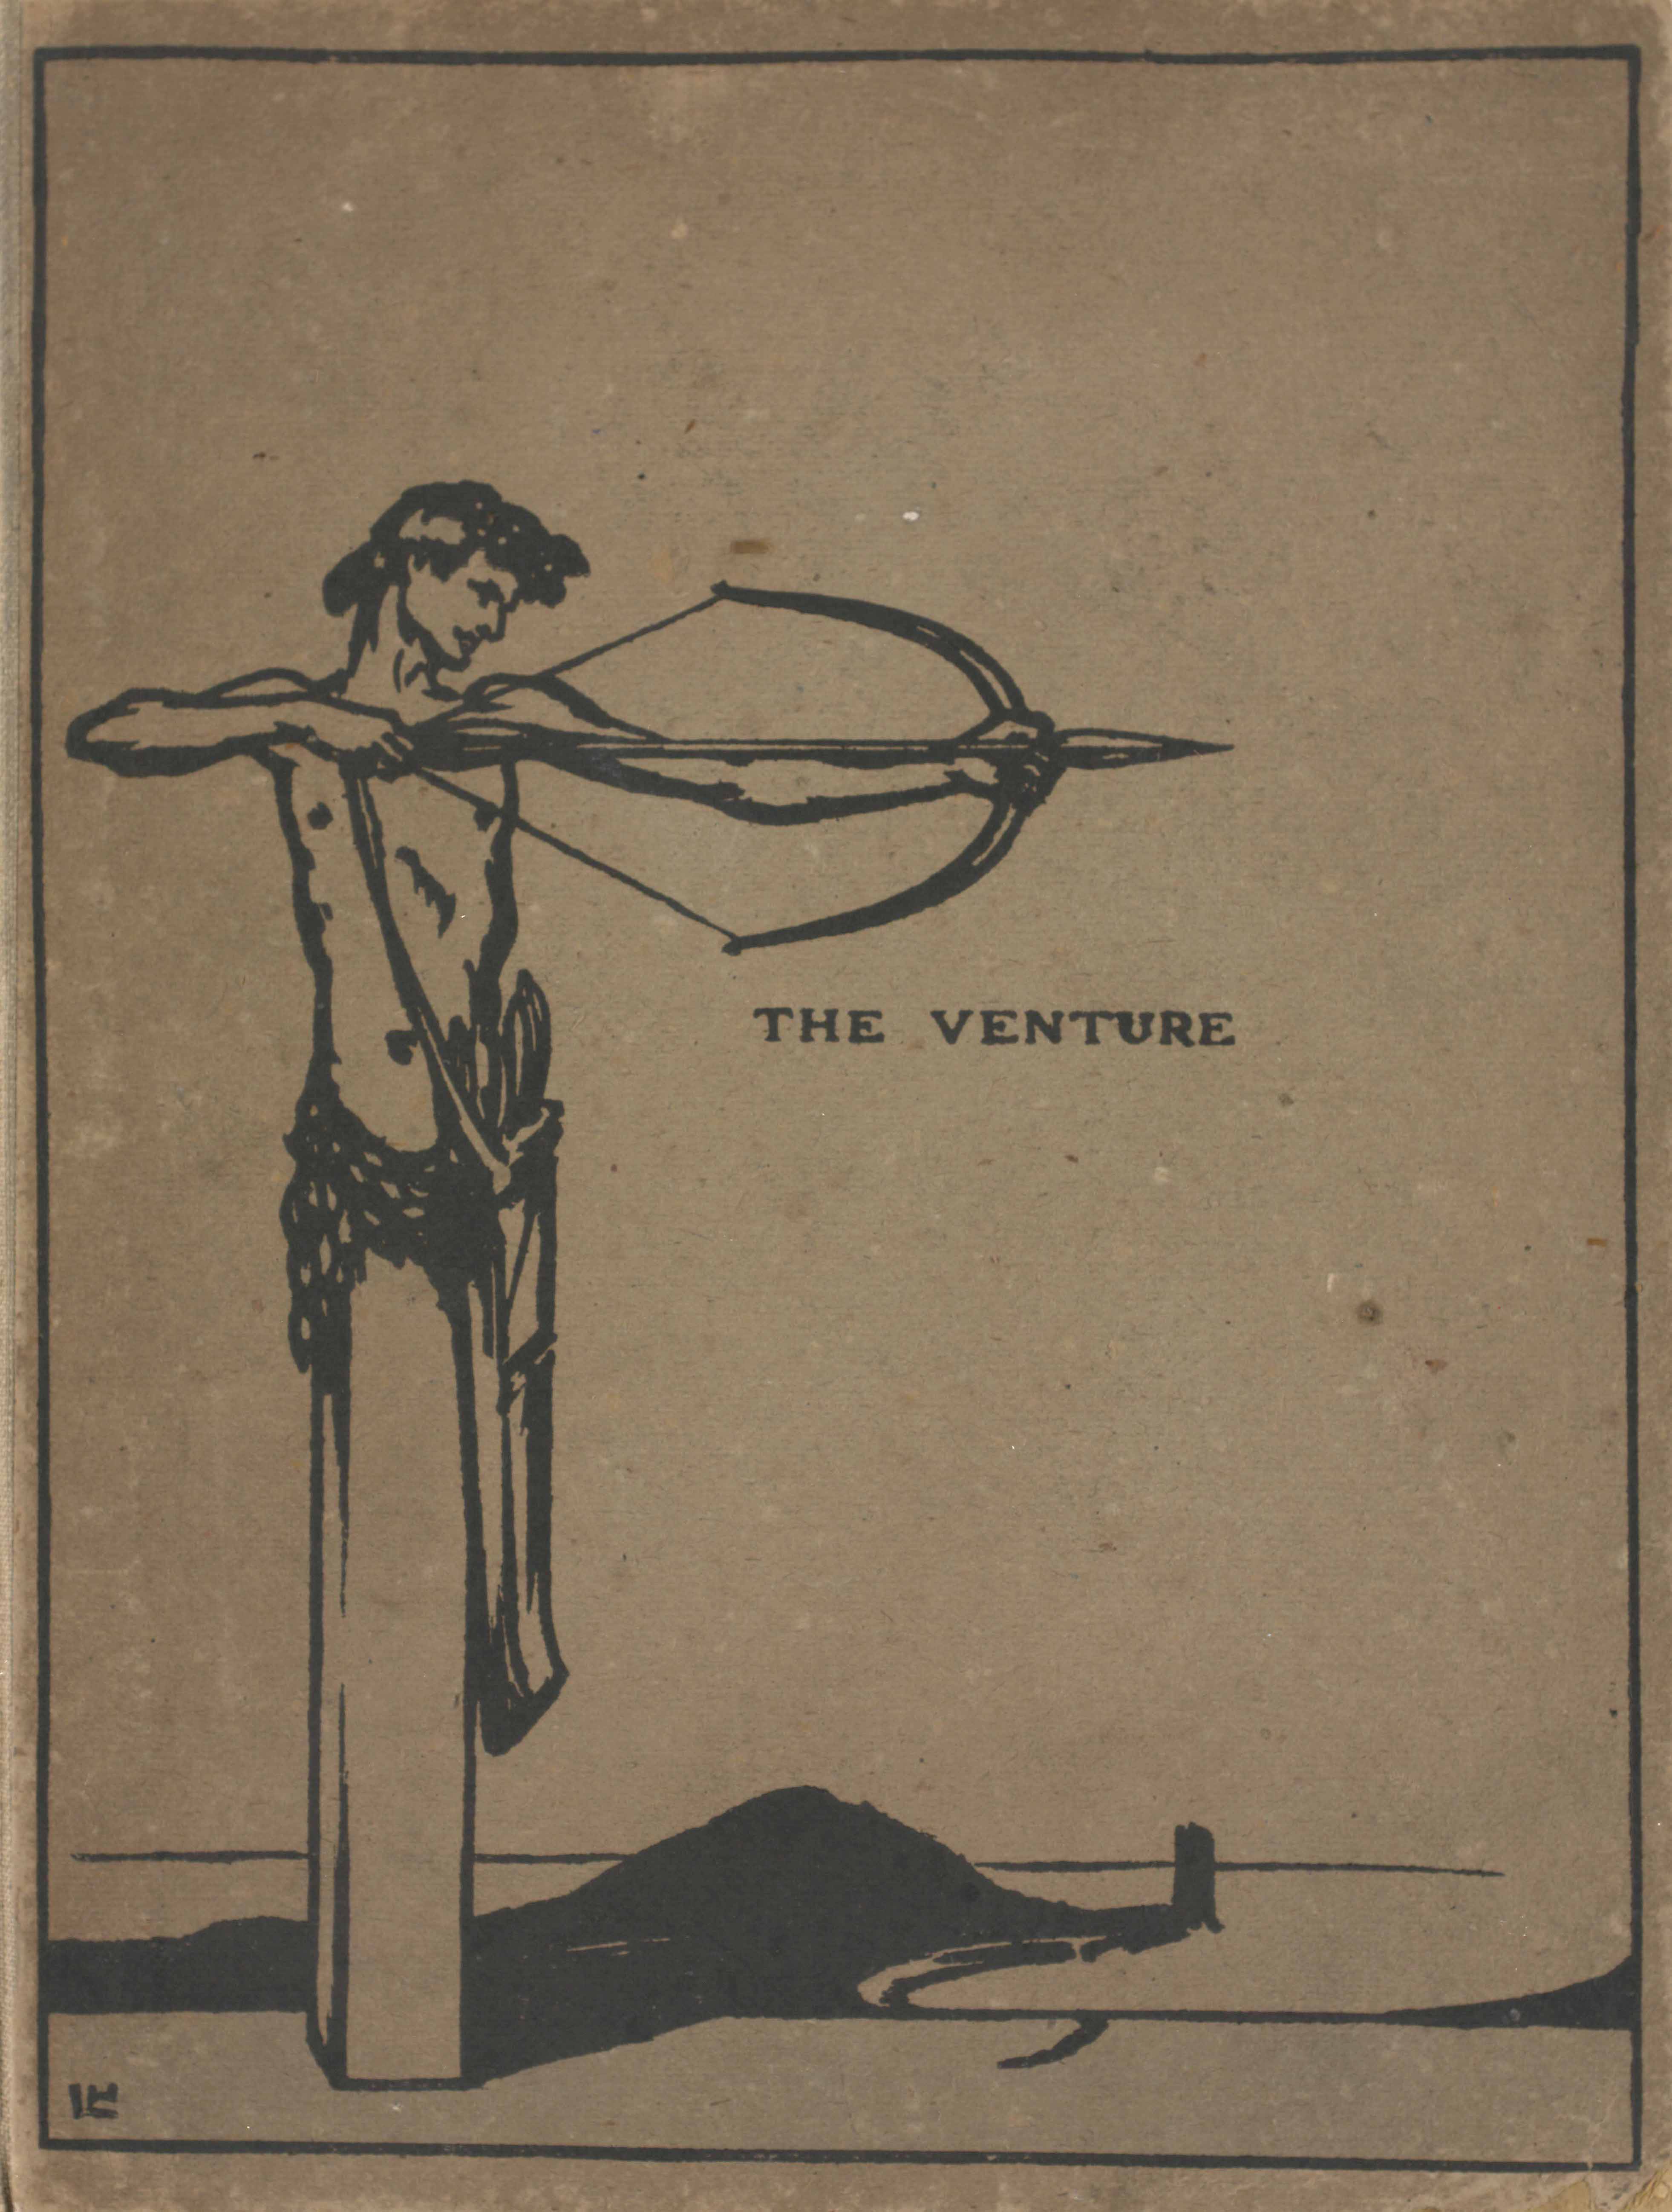 Figure 1. Laurence Housman, Cover design for The Venture, vol. 1,                        1903.